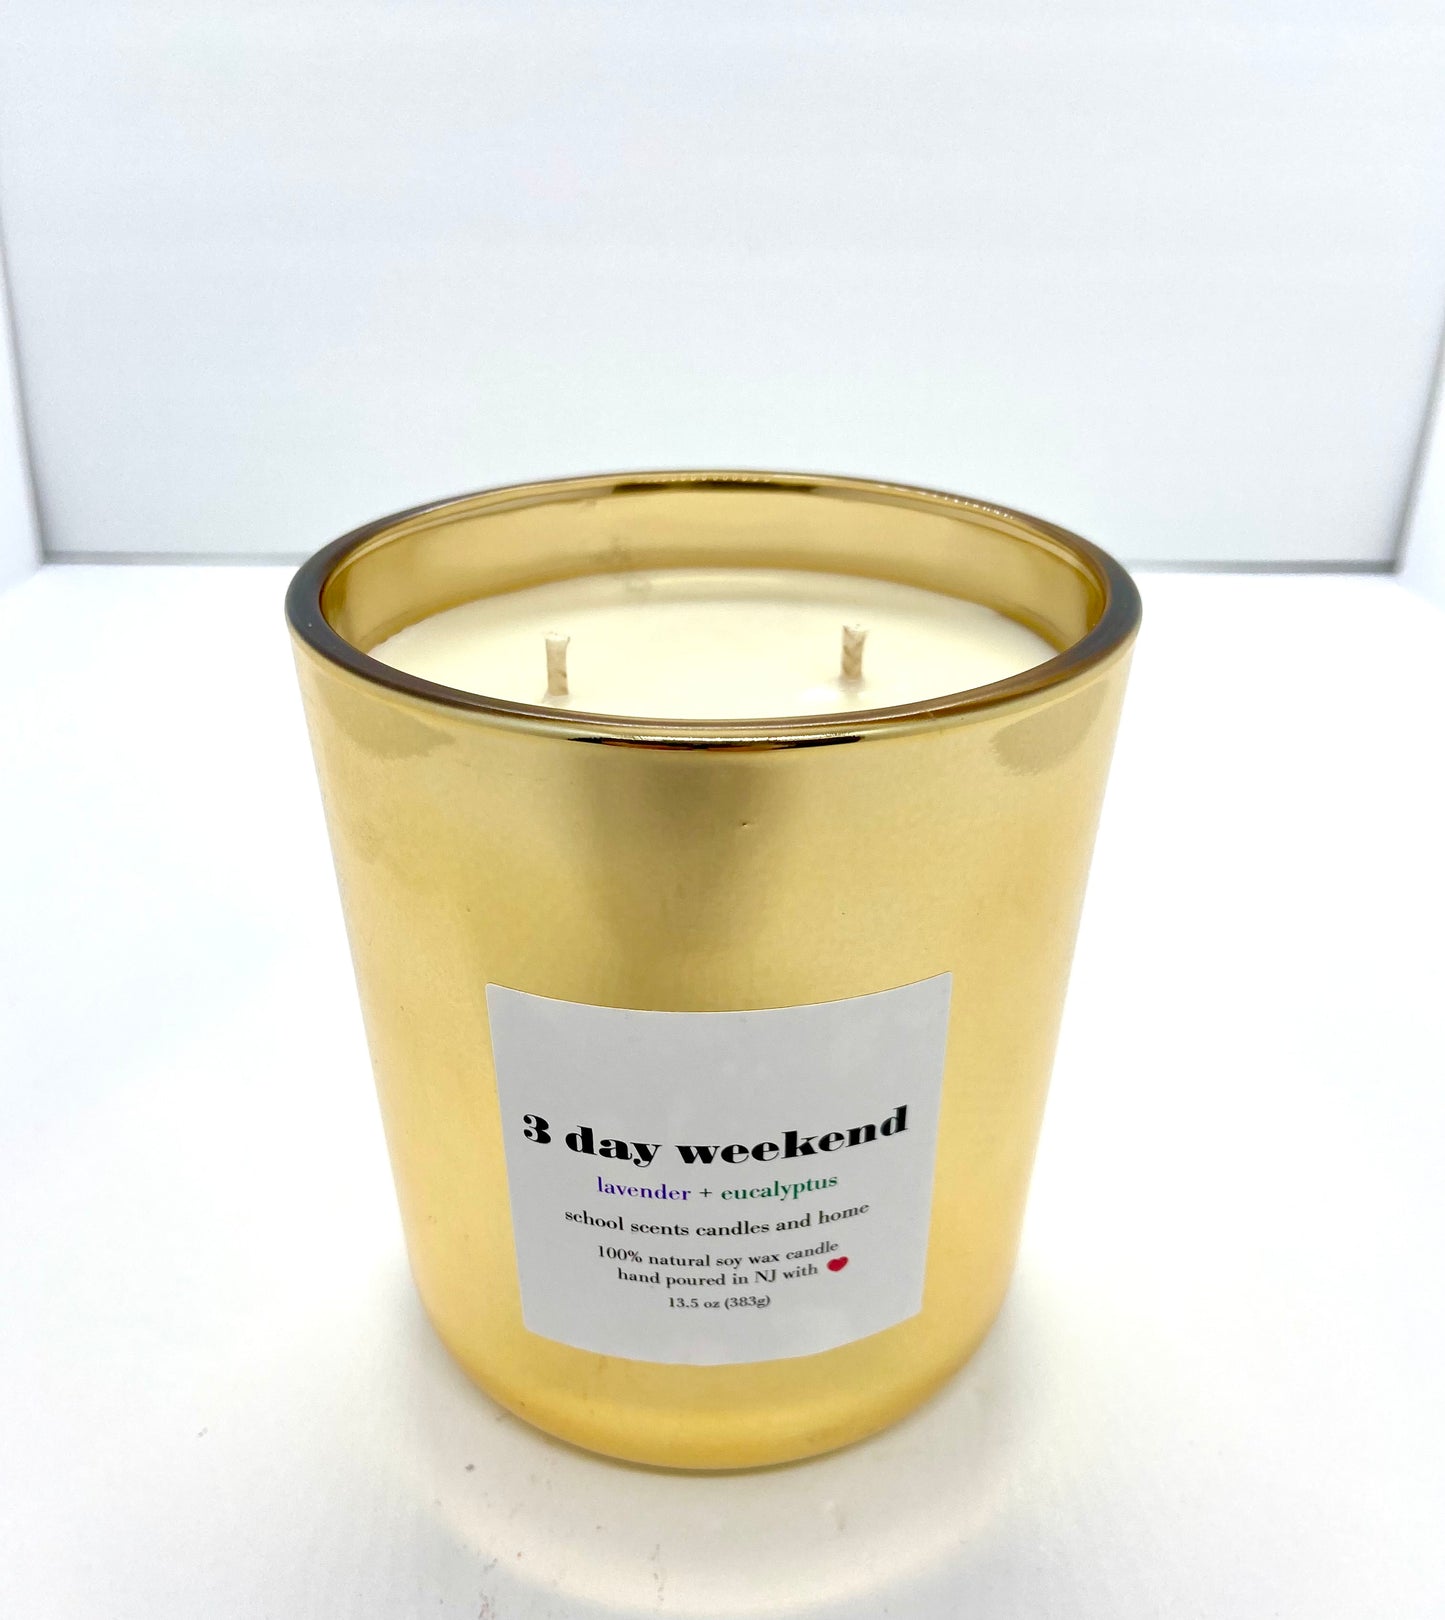 School Scents 3 Day Weekend 13.5 OZ Candle